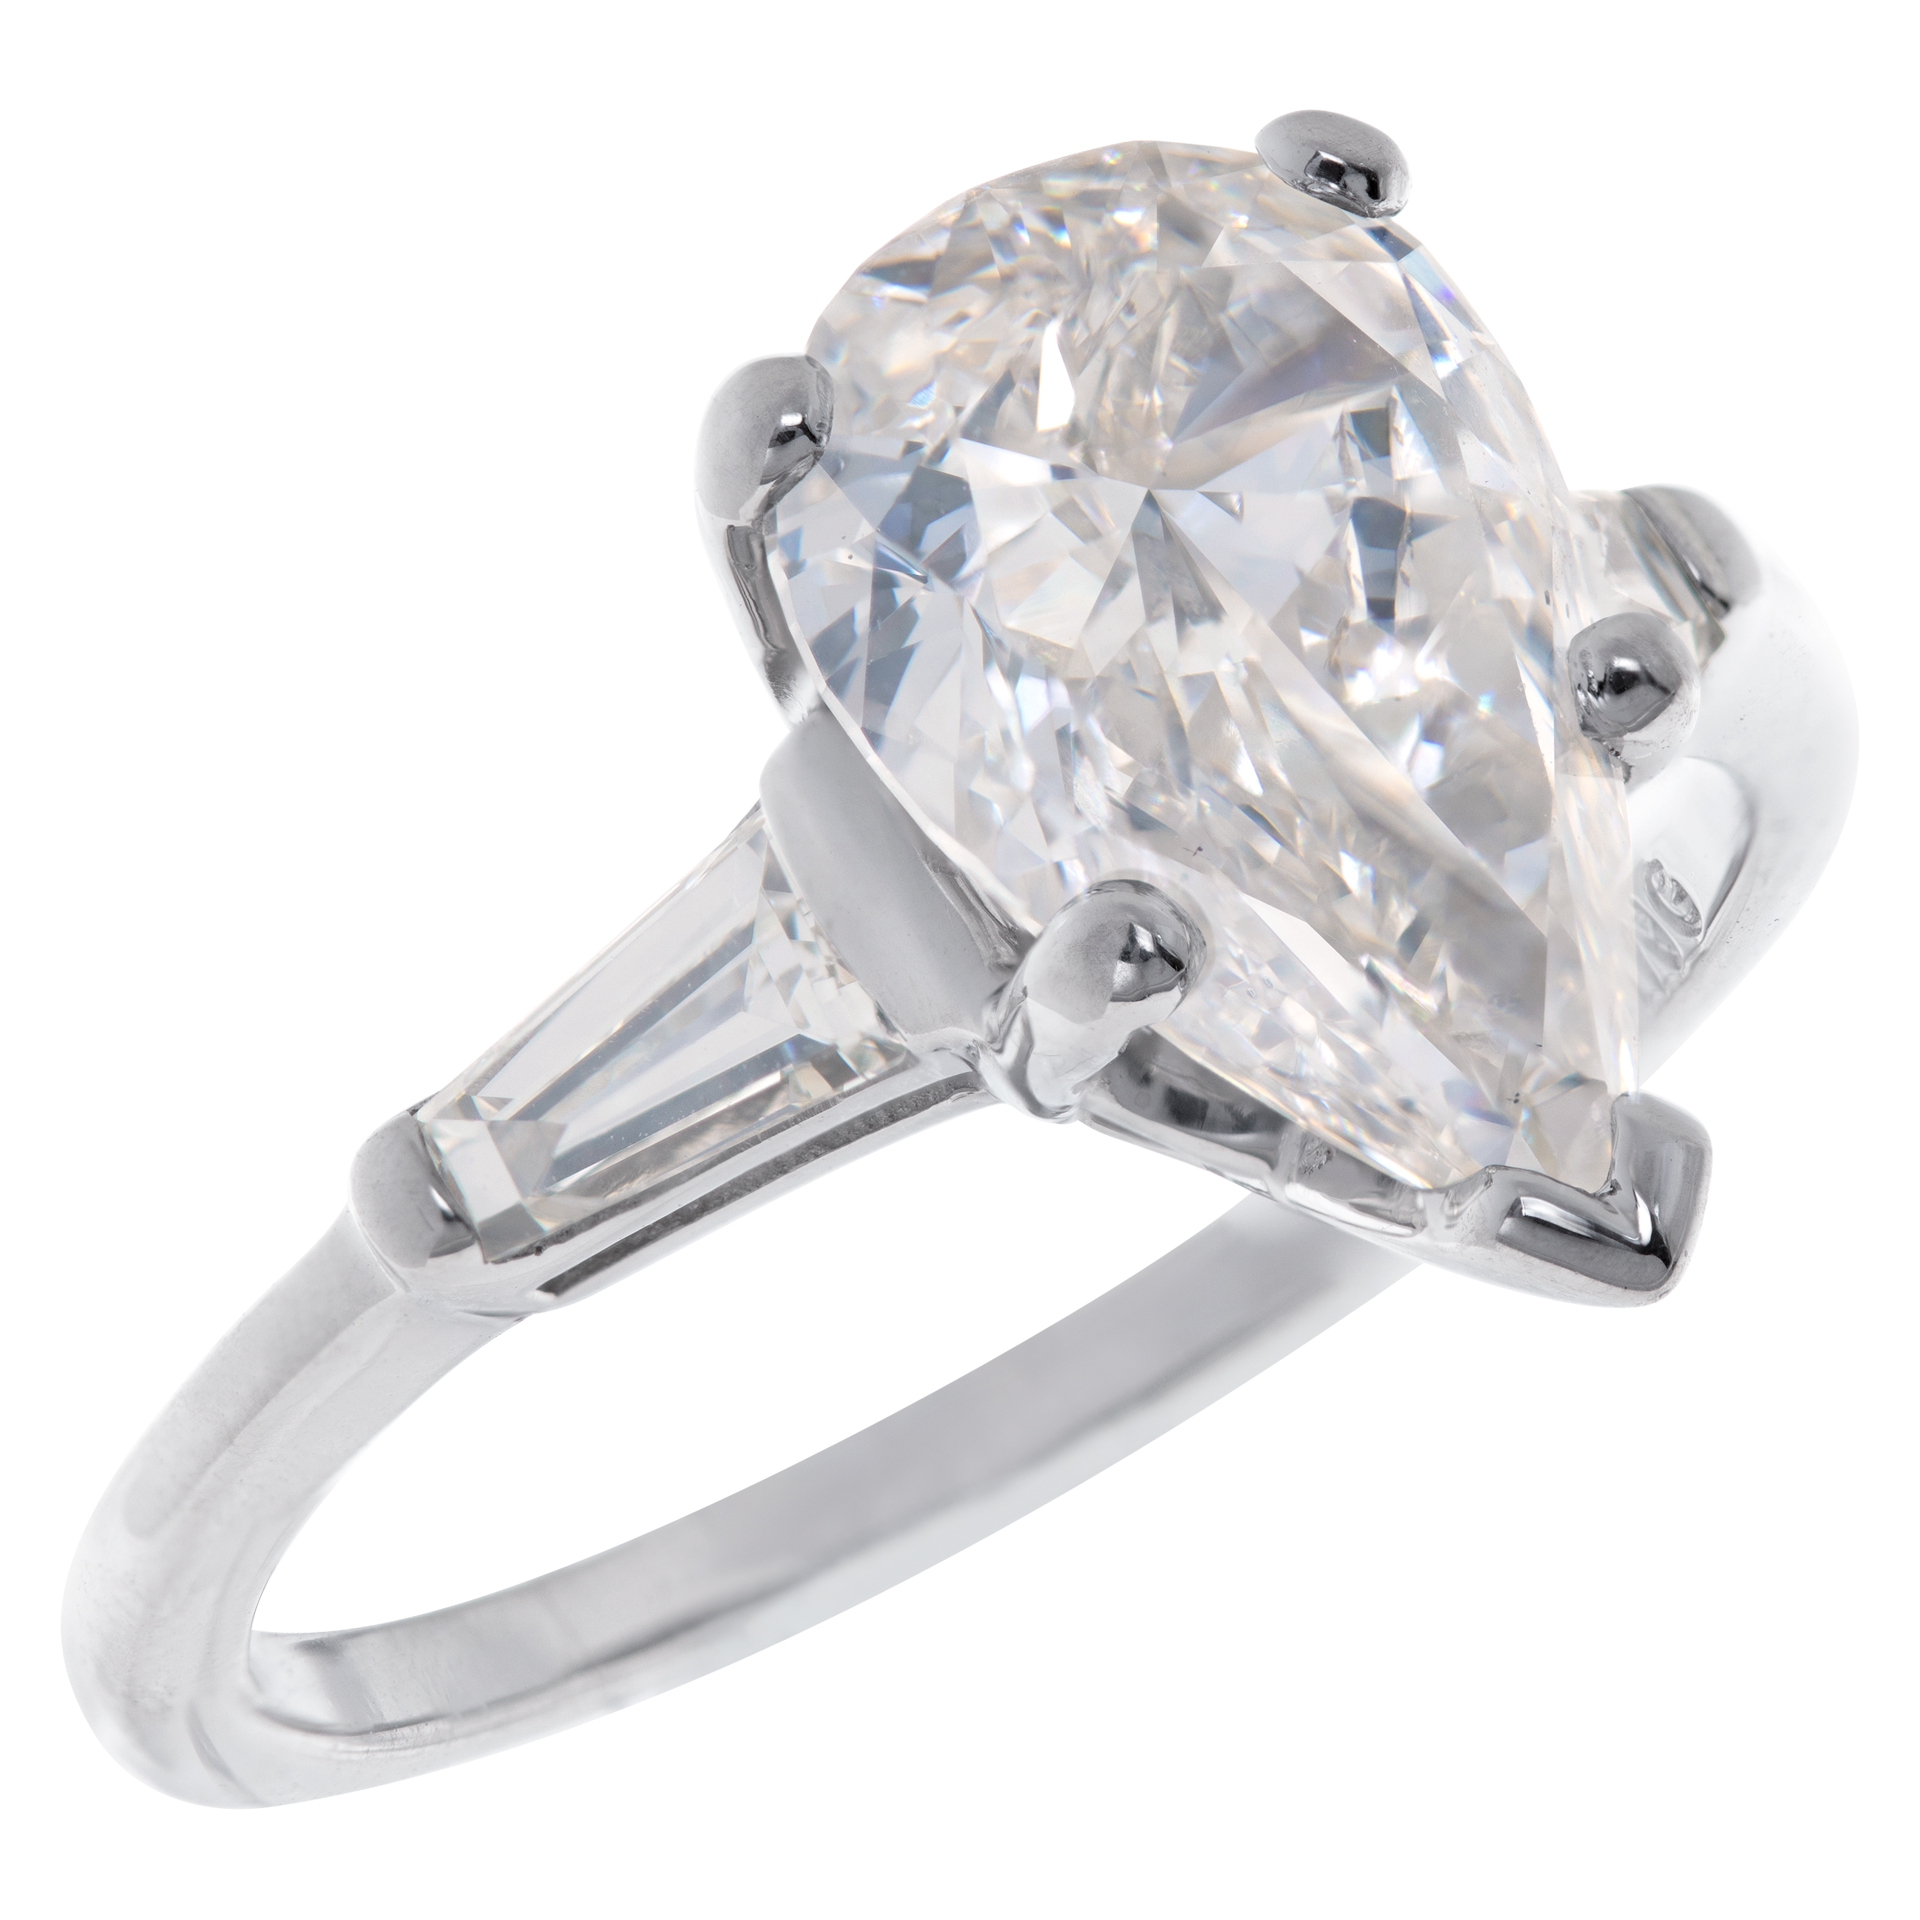 GIA Certified pear shaped diamond ring with 2.08 carat diamond (I color, VS2 clarity). in platinum setting image 3